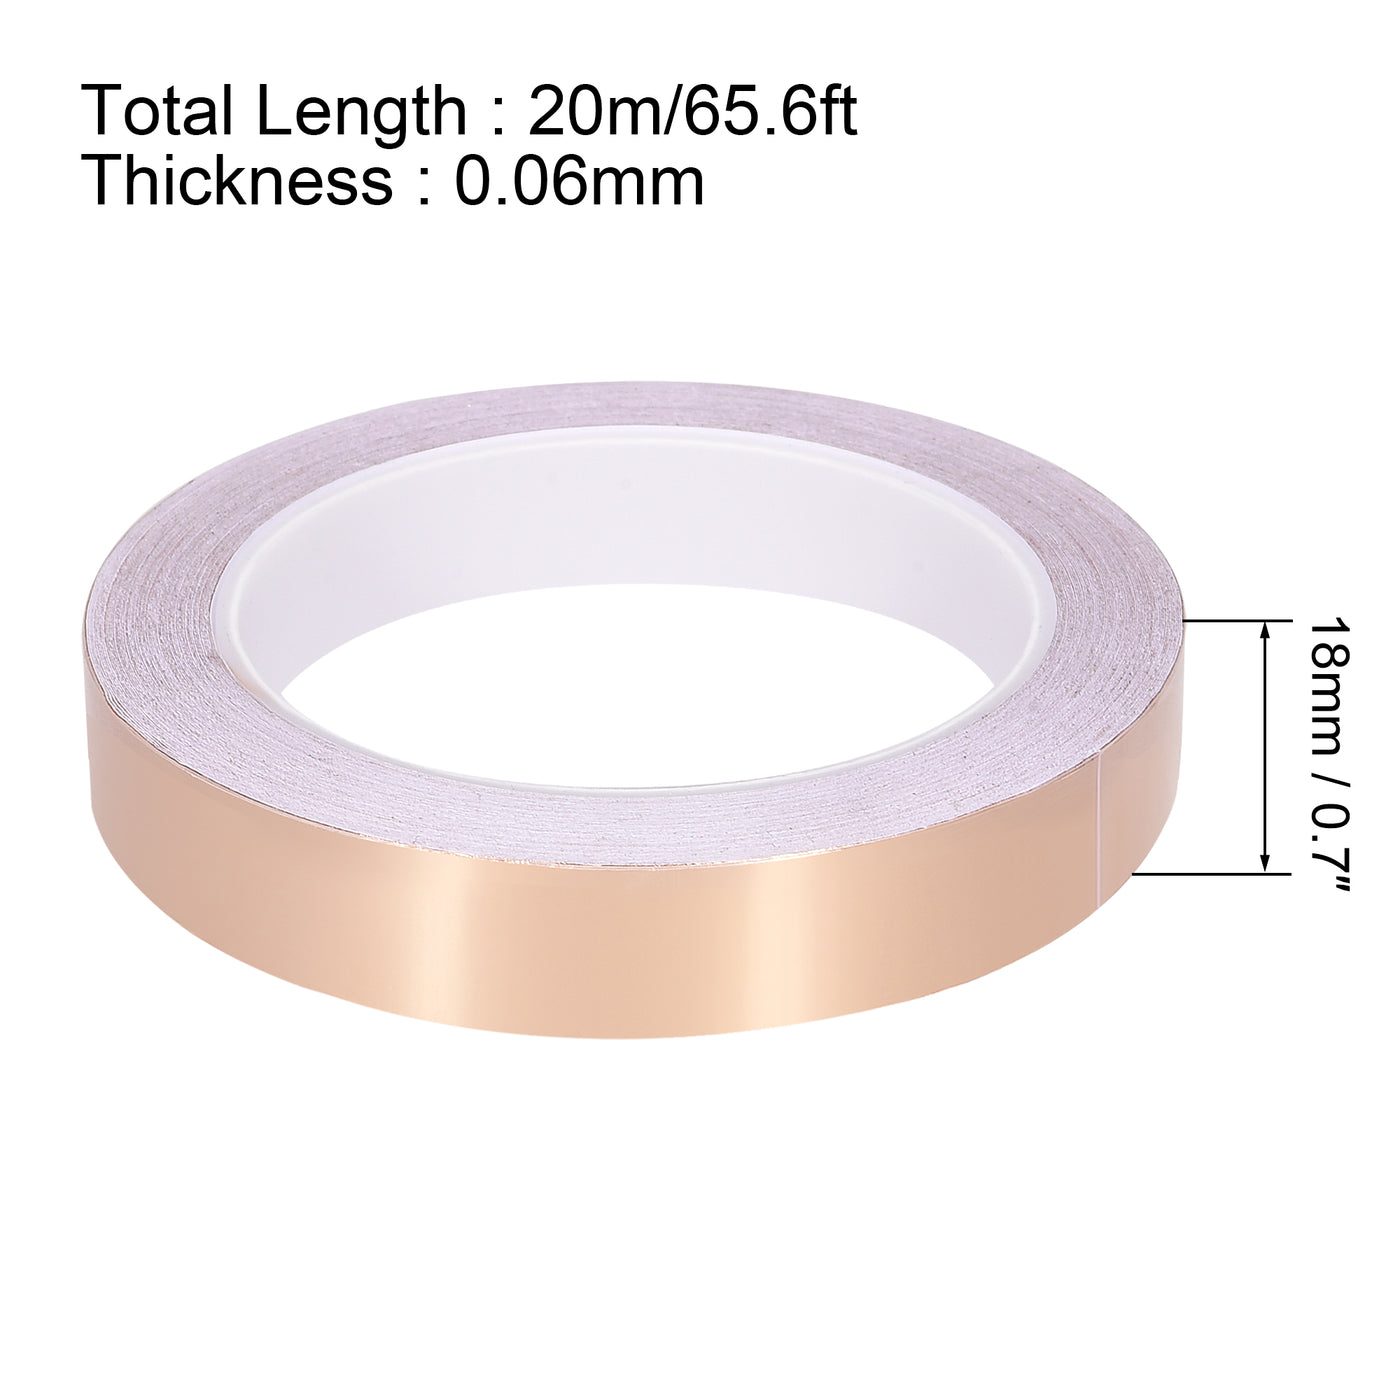 uxcell Uxcell Single-Sided Conductive Tape Copper Foil Tape 18mm x 20m/65.6ft for EMI Shielding 1pcs